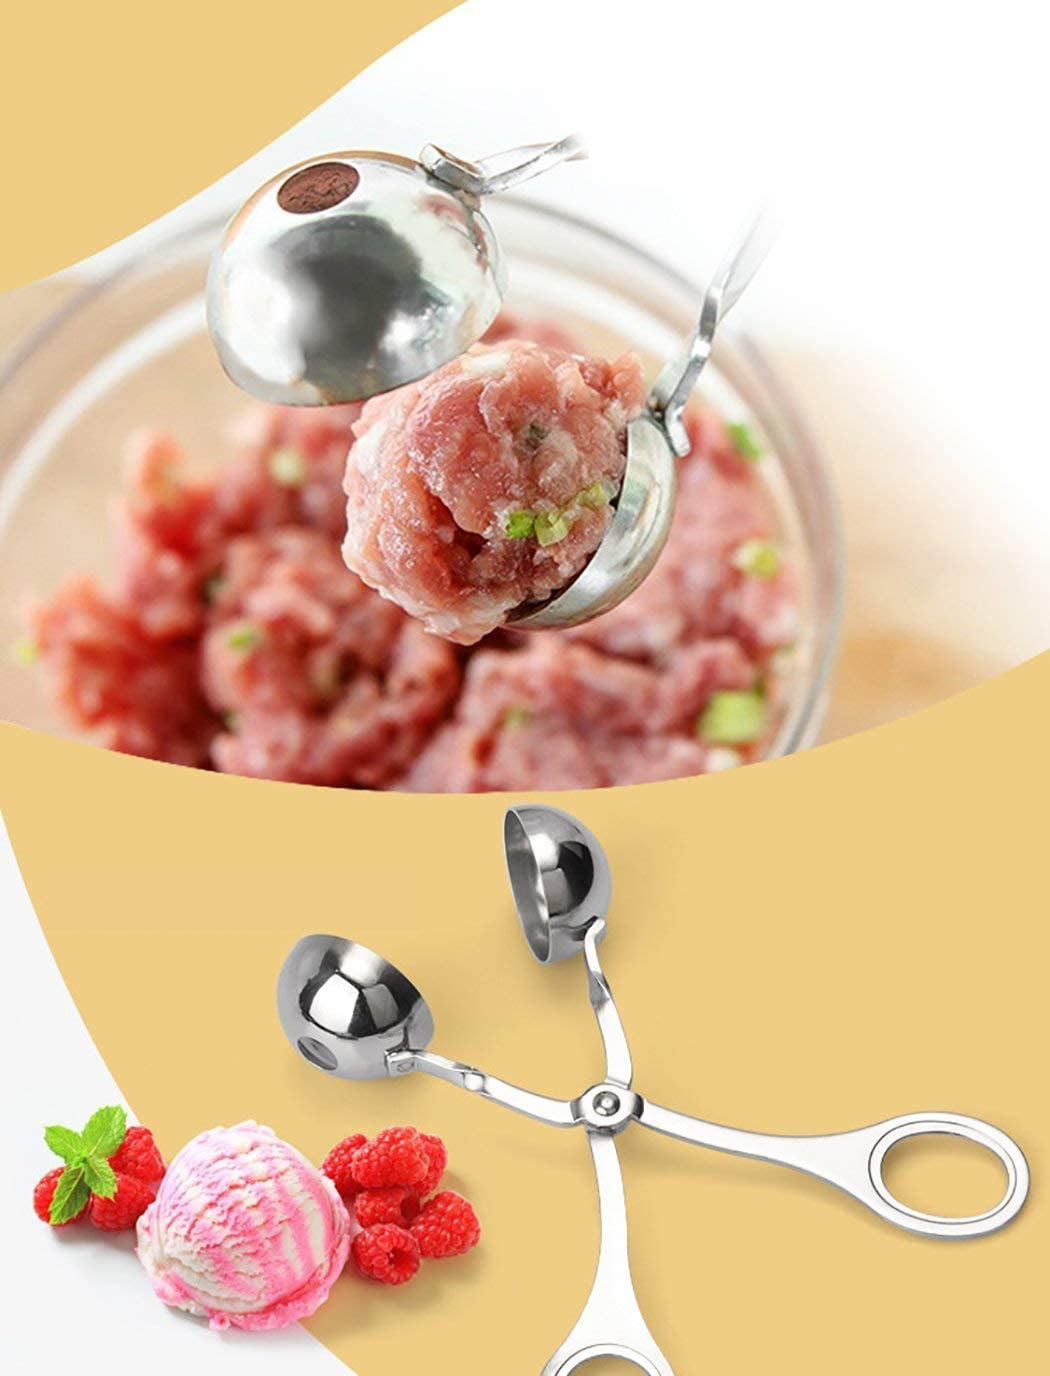 UPKOCH Meat Ballers Stainless Steel Melon Ballers Tongs Meat Rice Ball Maker Ice Cream Scoop for Fruits Meatball Cake Random Color Size S 